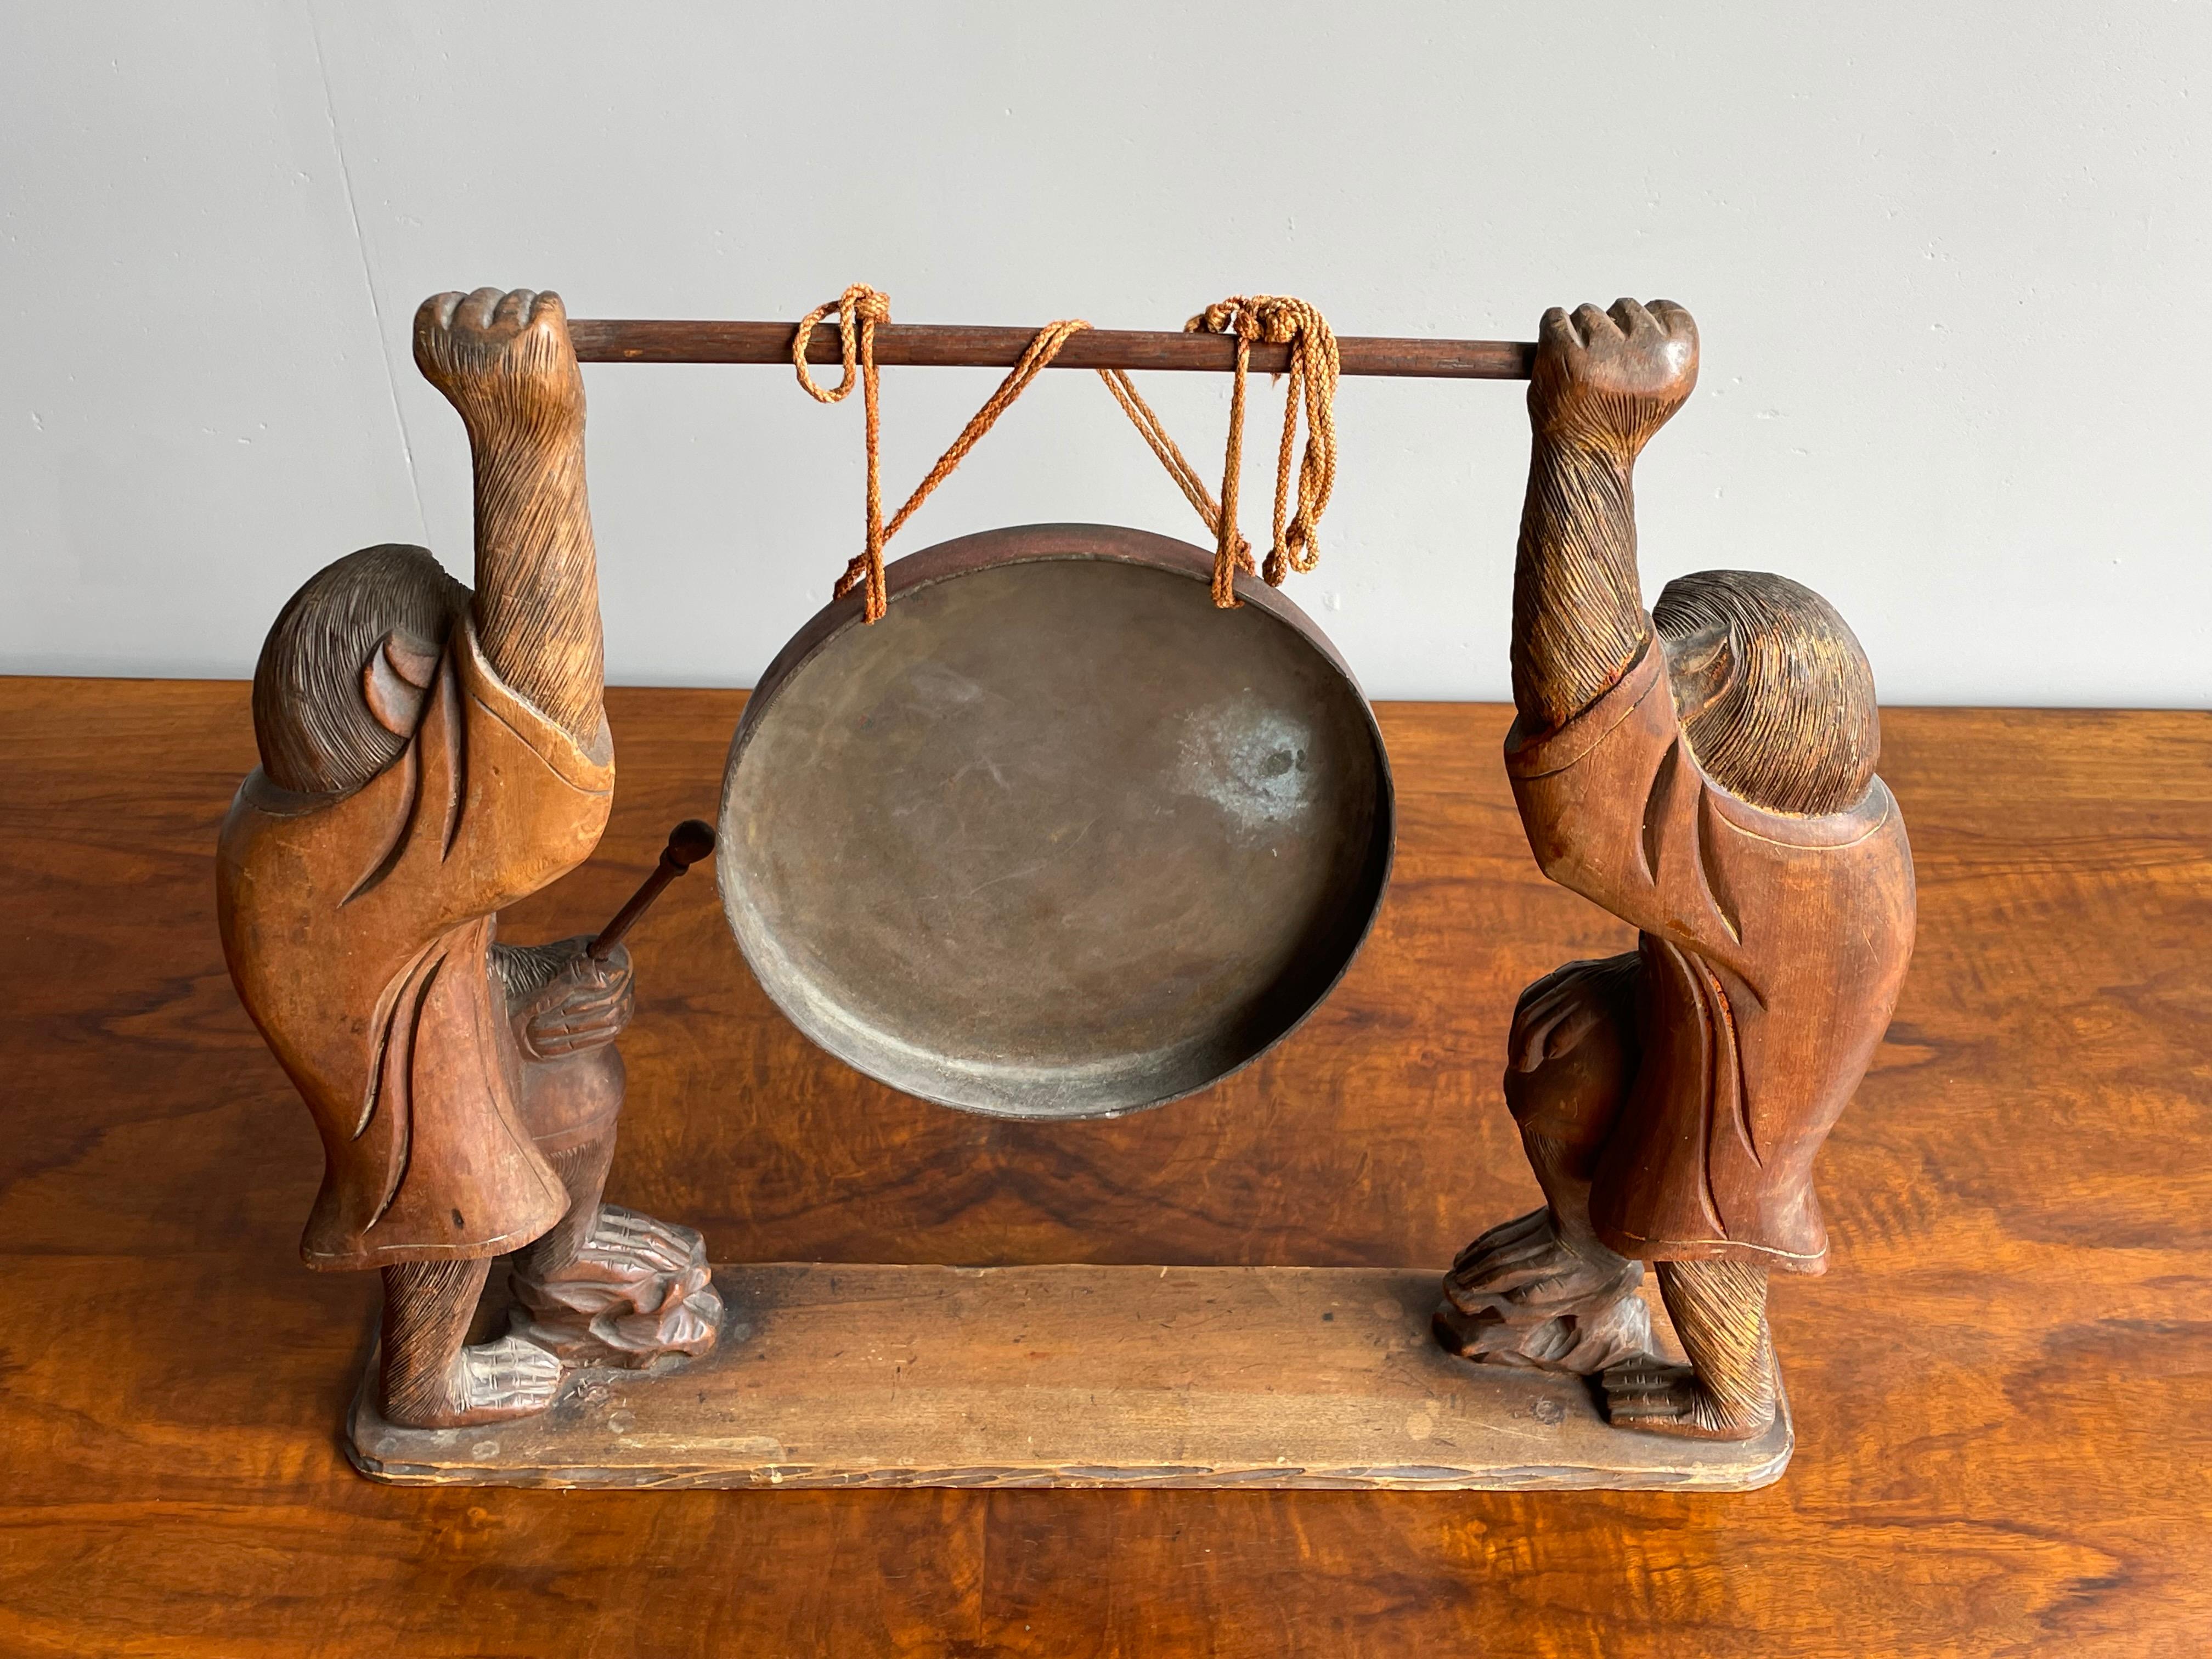 Antique Chinese Table Gong Held Up by Two Hand Carved Wooden Monkey Sculptures 9